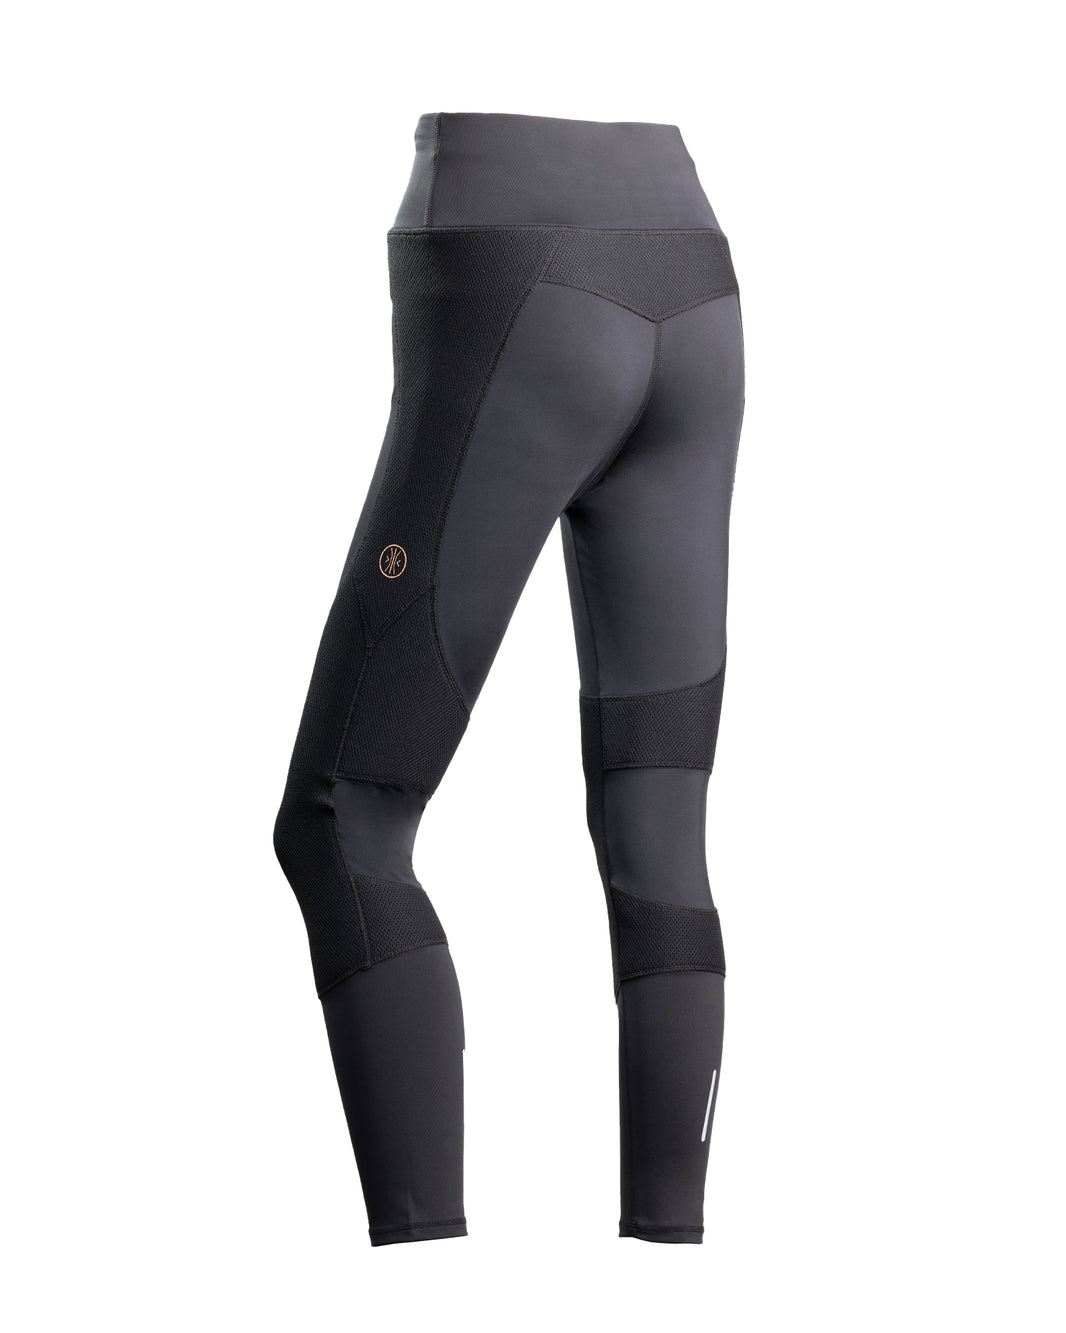 Stay fit and active: Imbrace's pioneeering support leggings pave the way, City & Business, Finance